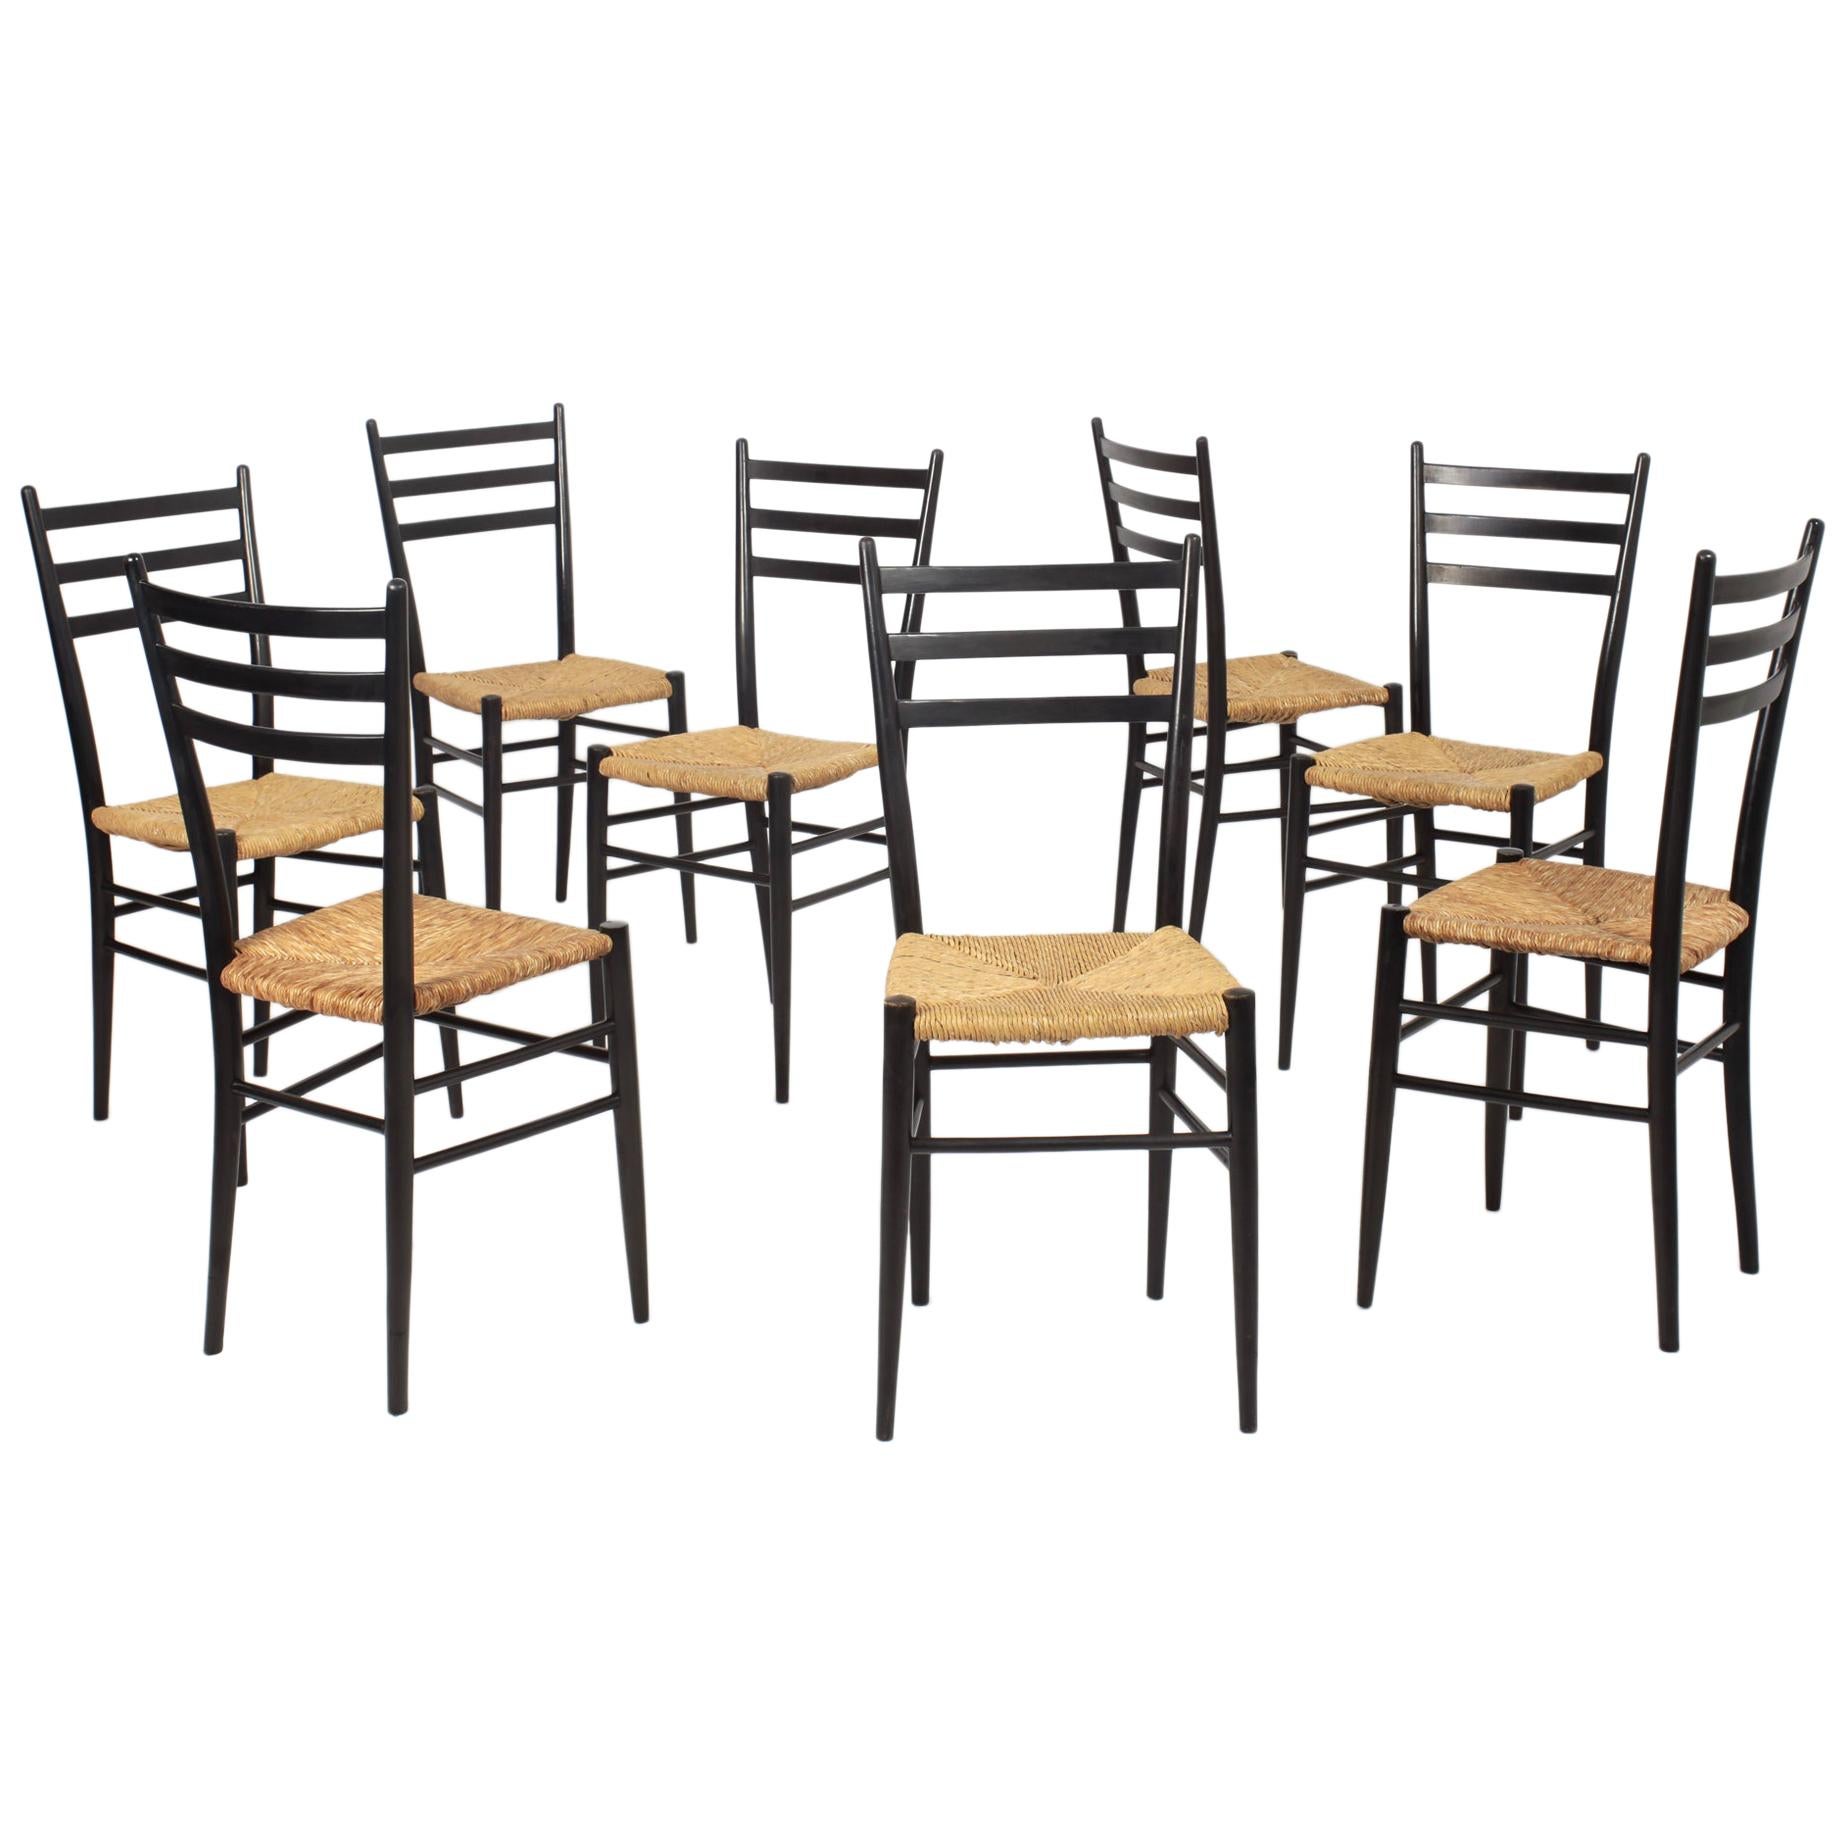 Set of 8 Black Wood and Straw Italian Chairs, 1960s